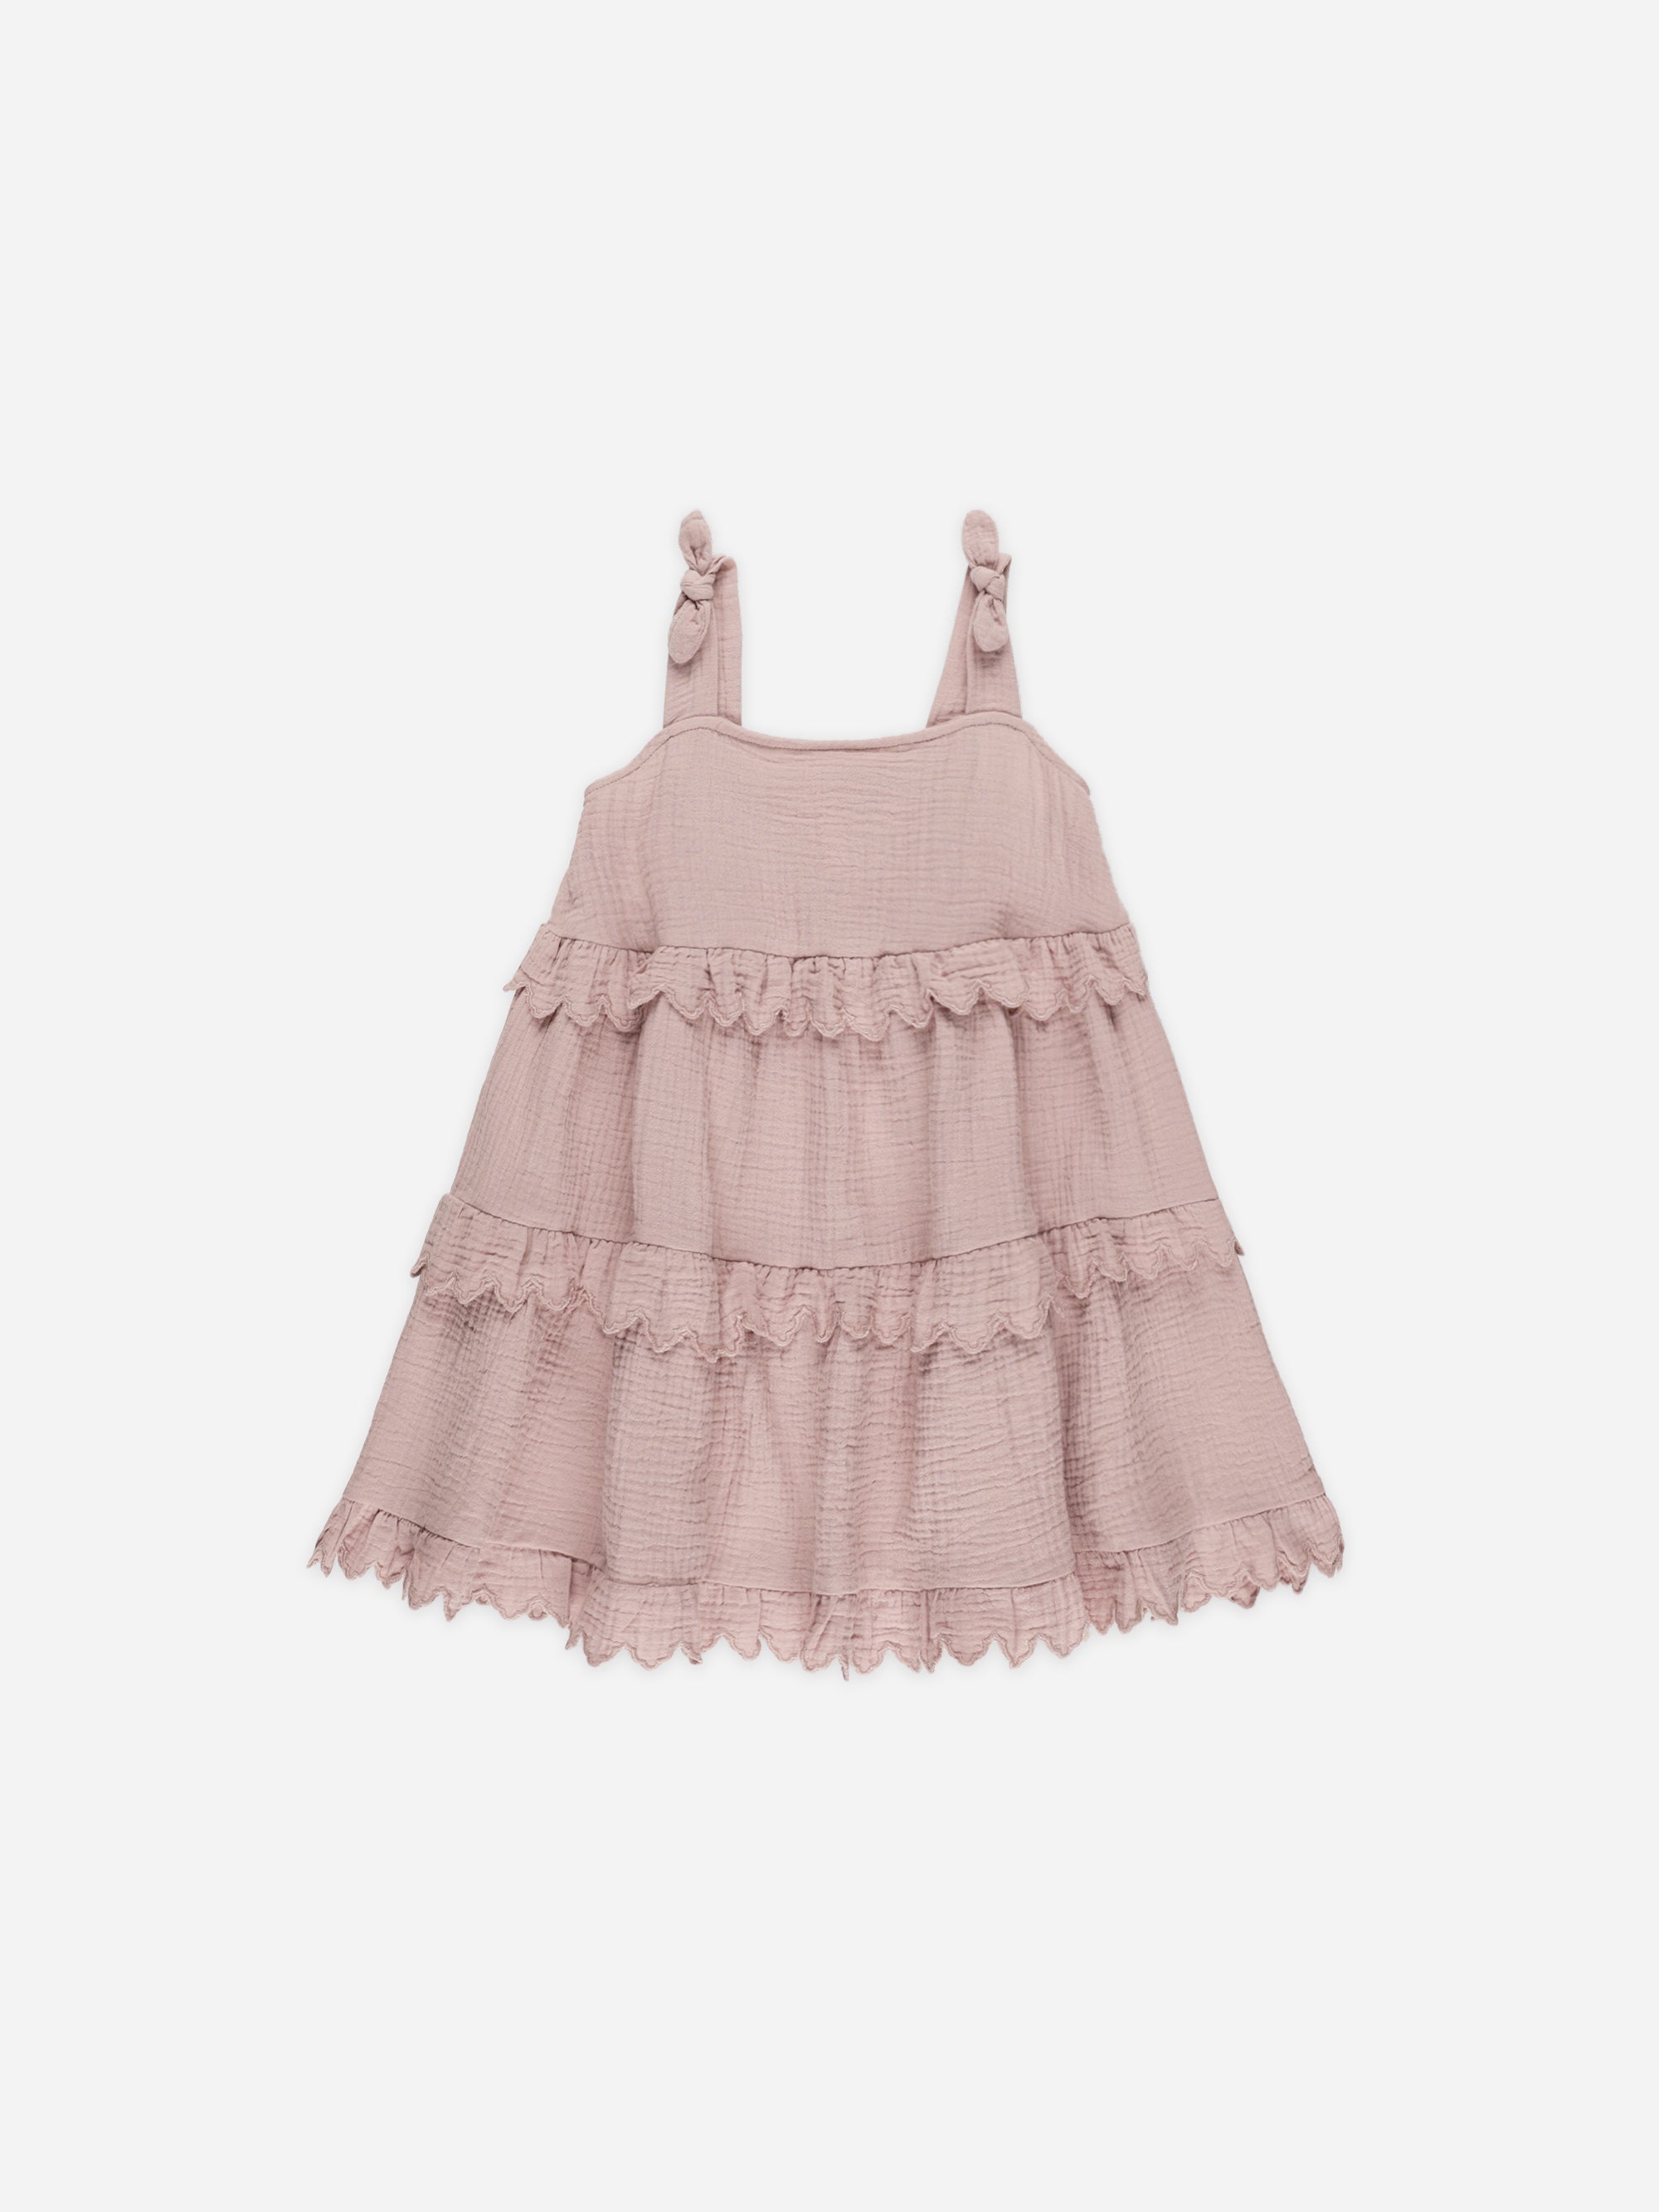 Ruffle Swing Dress || Mauve - Rylee + Cru | Kids Clothes | Trendy Baby Clothes | Modern Infant Outfits |